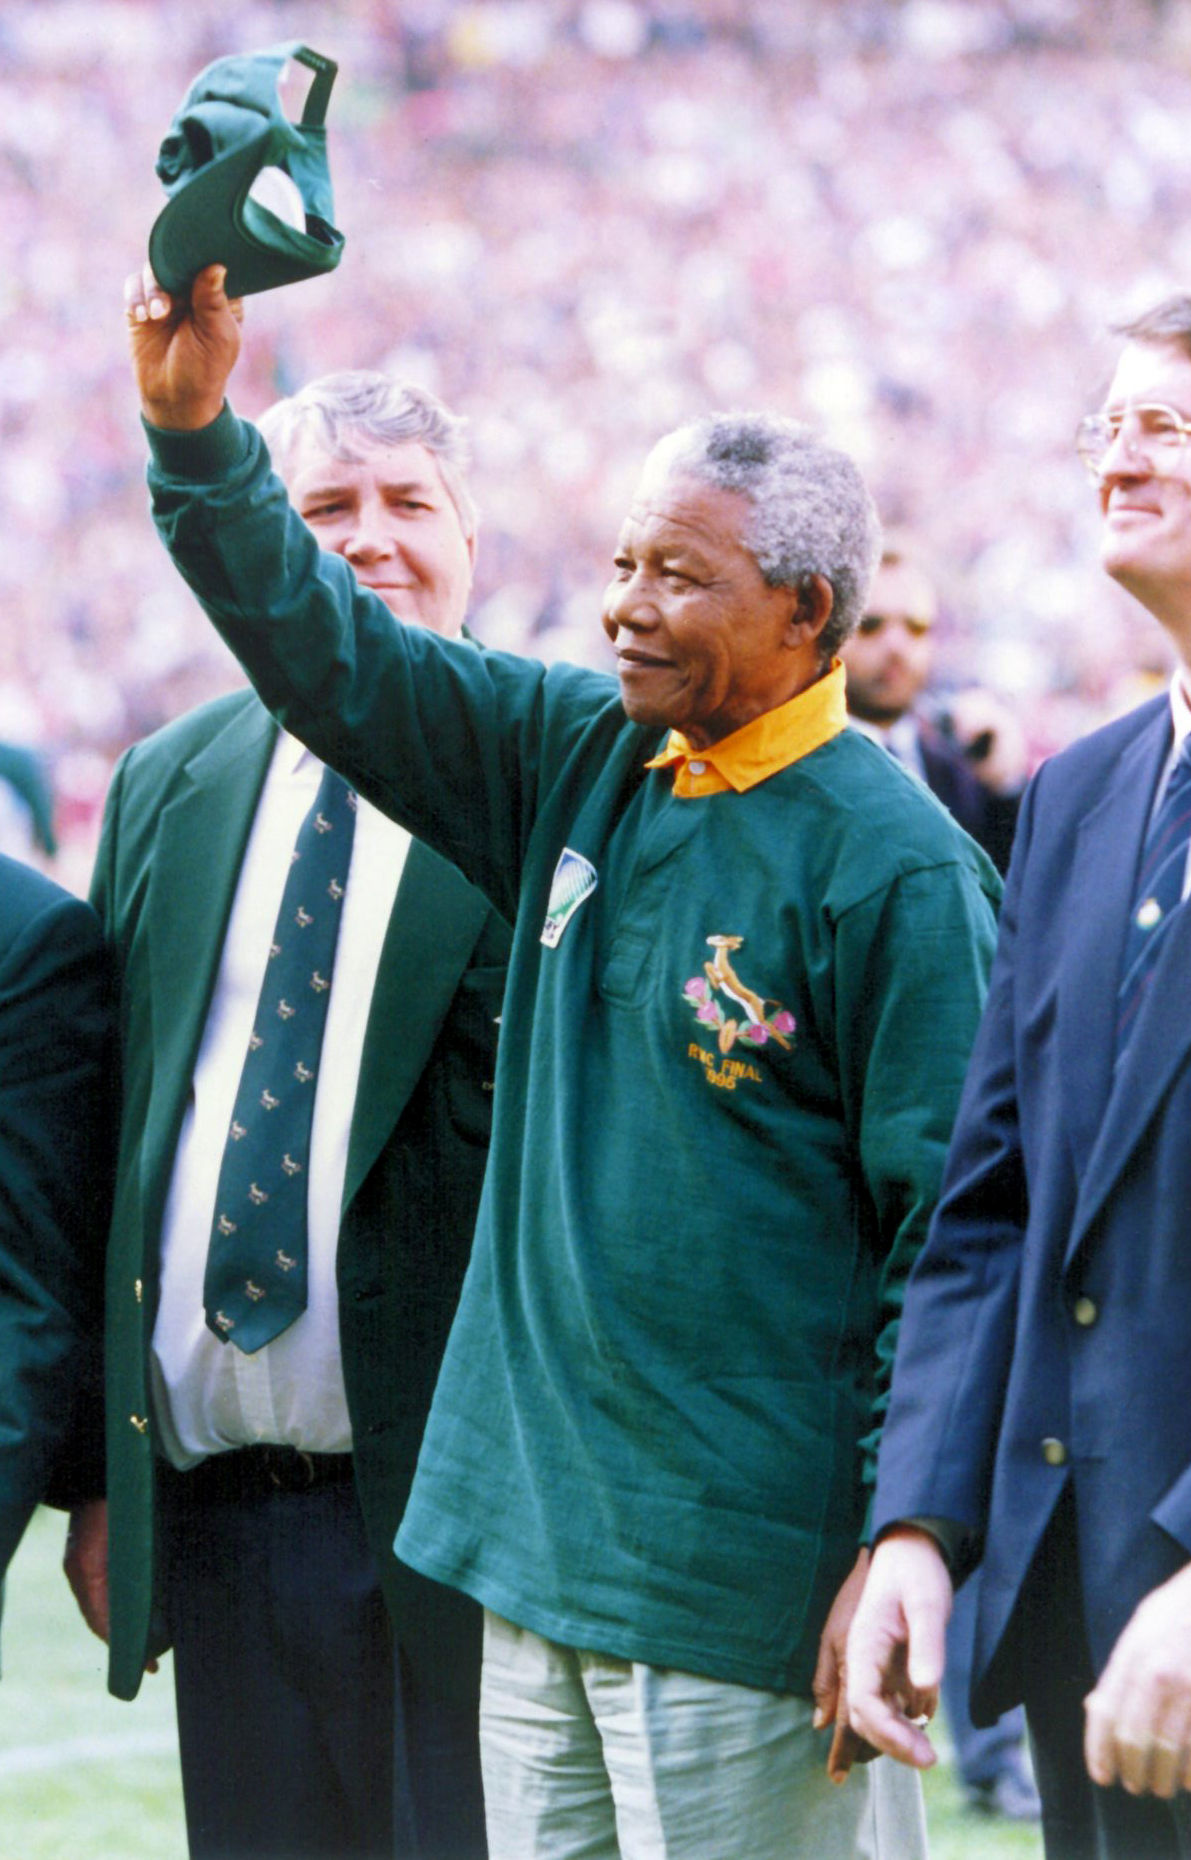 Then South African president Nelson Mandela, dressed in a number 6 Springbok jersey, celebrates after South Africa beat the All Blacks by 15-12 to win the 1995 Rugby World Cup on June 24 1995.